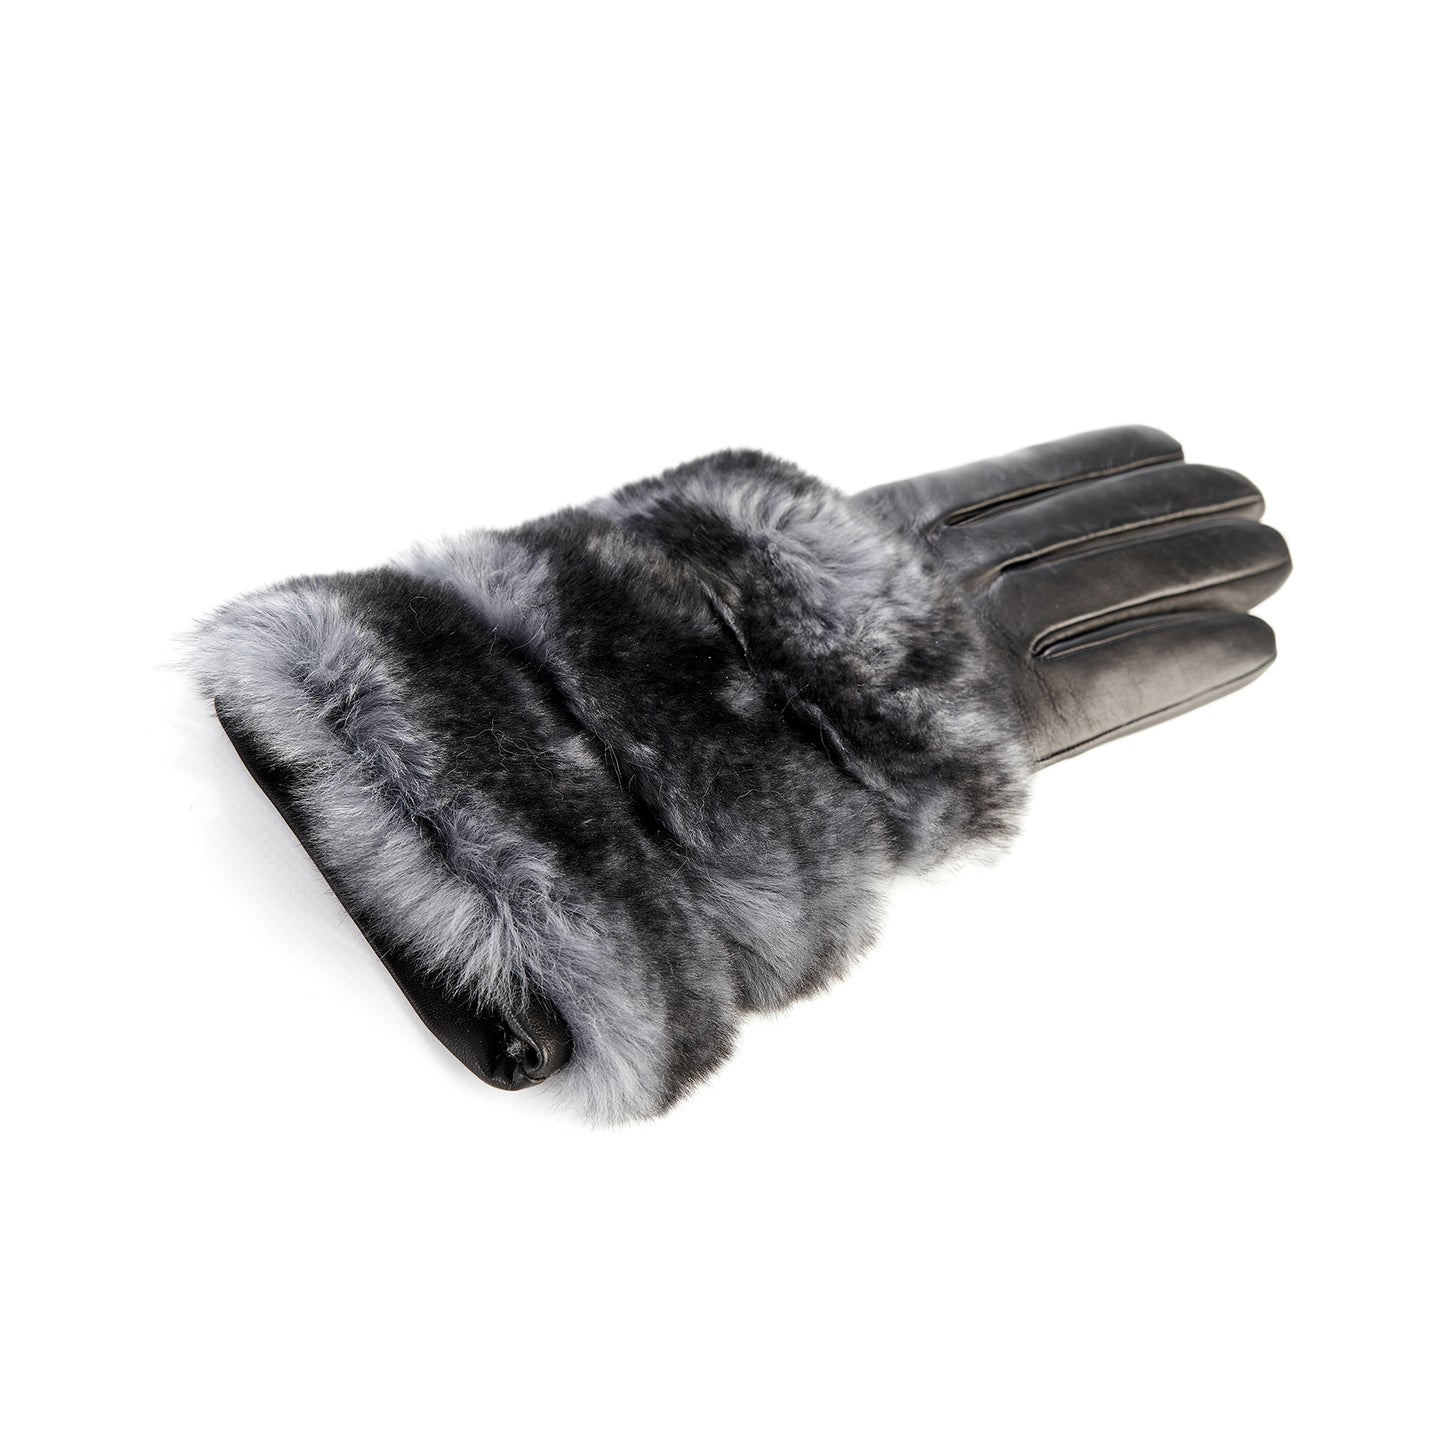 Women's gloves in black nappa leather with natural fur